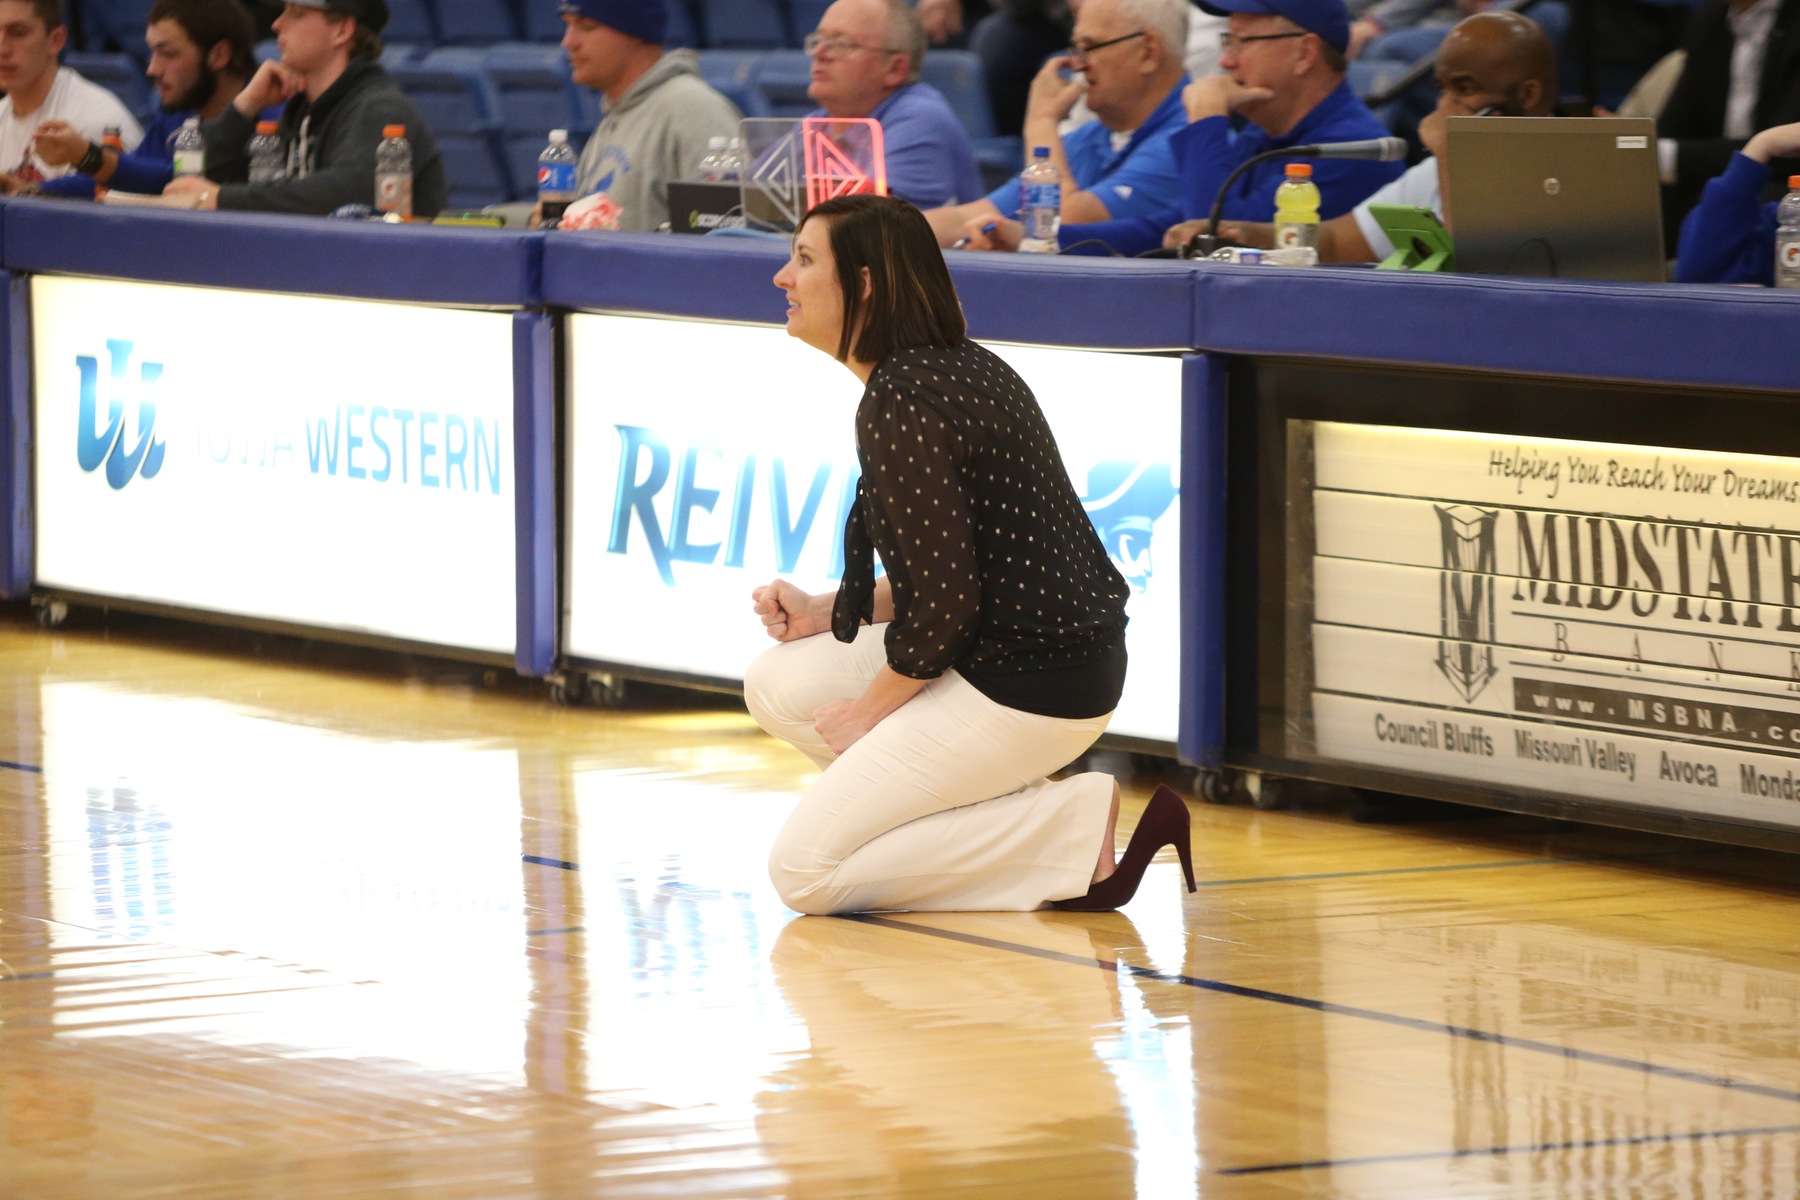 4th Quarter Outburst Helps Reivers in Rout of Barton; Vande Hoef Wins 100th Game at Iowa Western